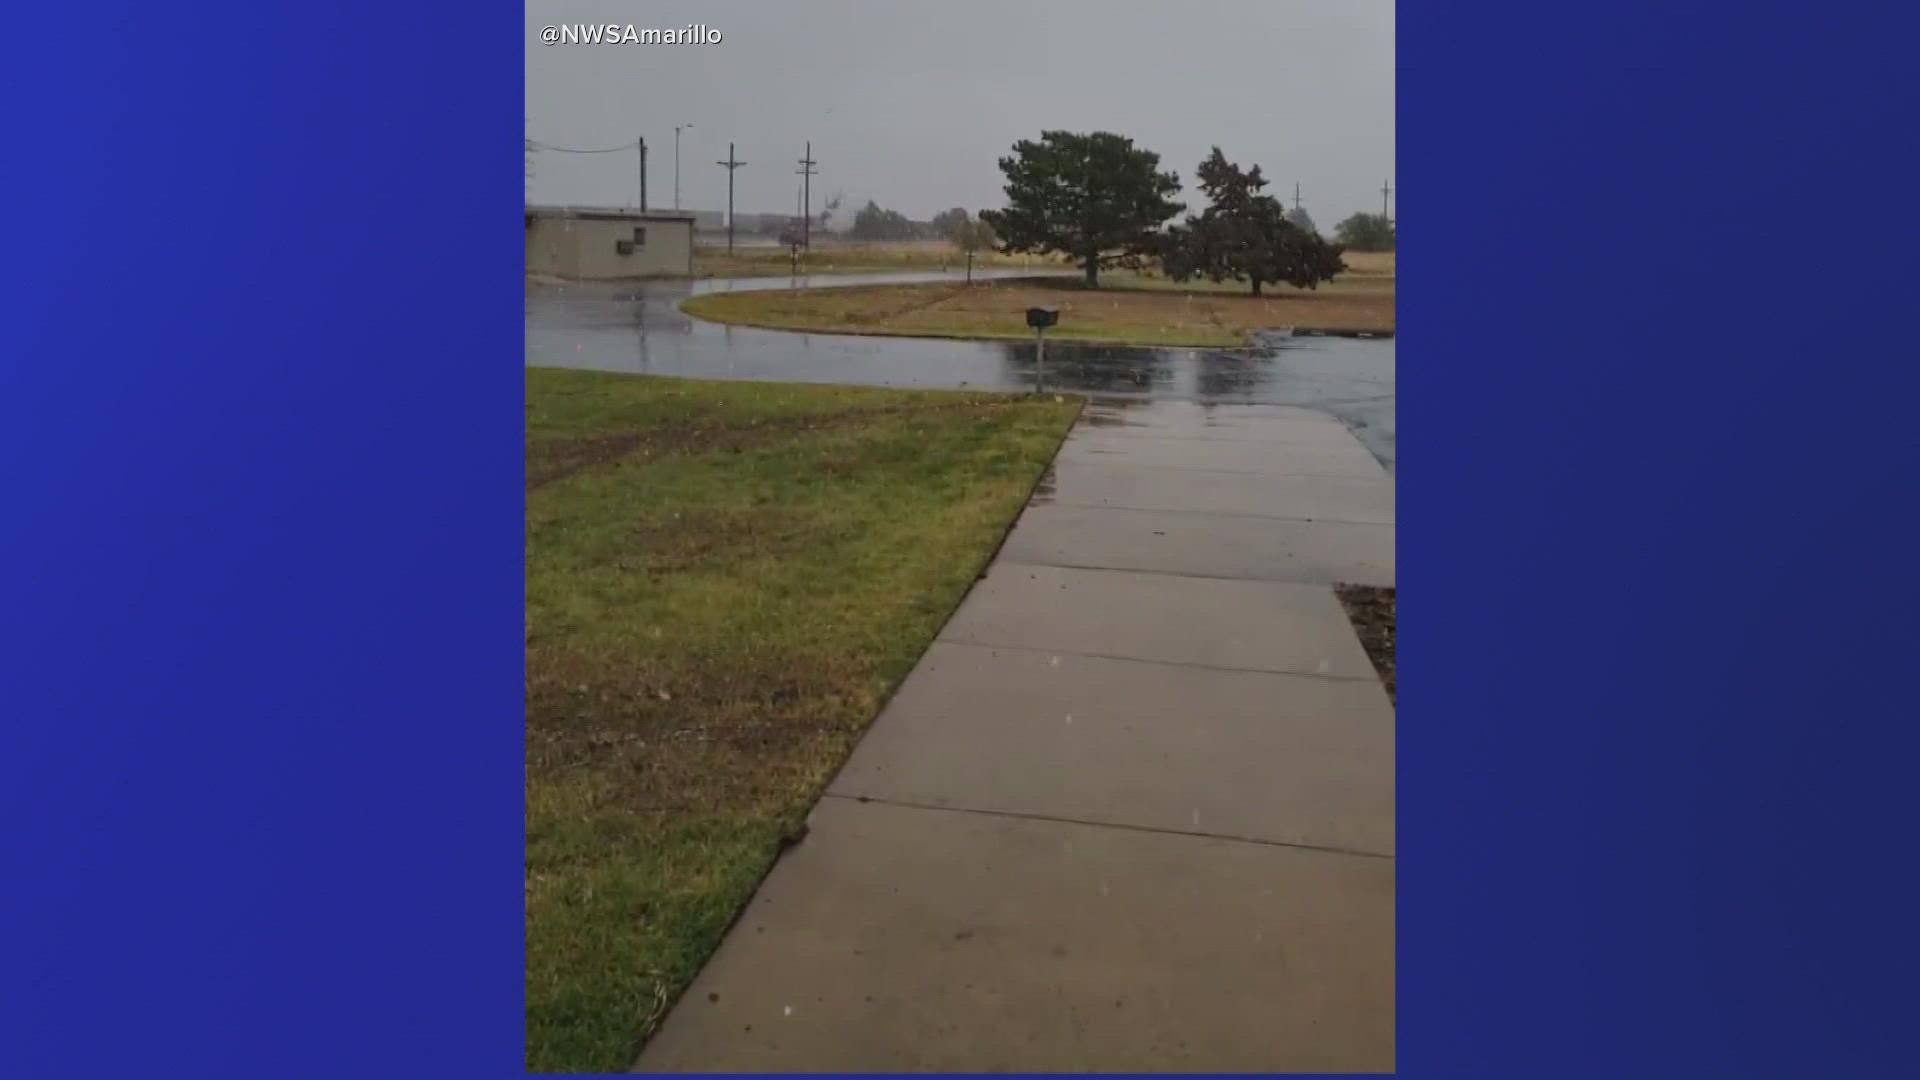 Residents of Amarillo got to see a rare sight in Texas on Friday, snow.